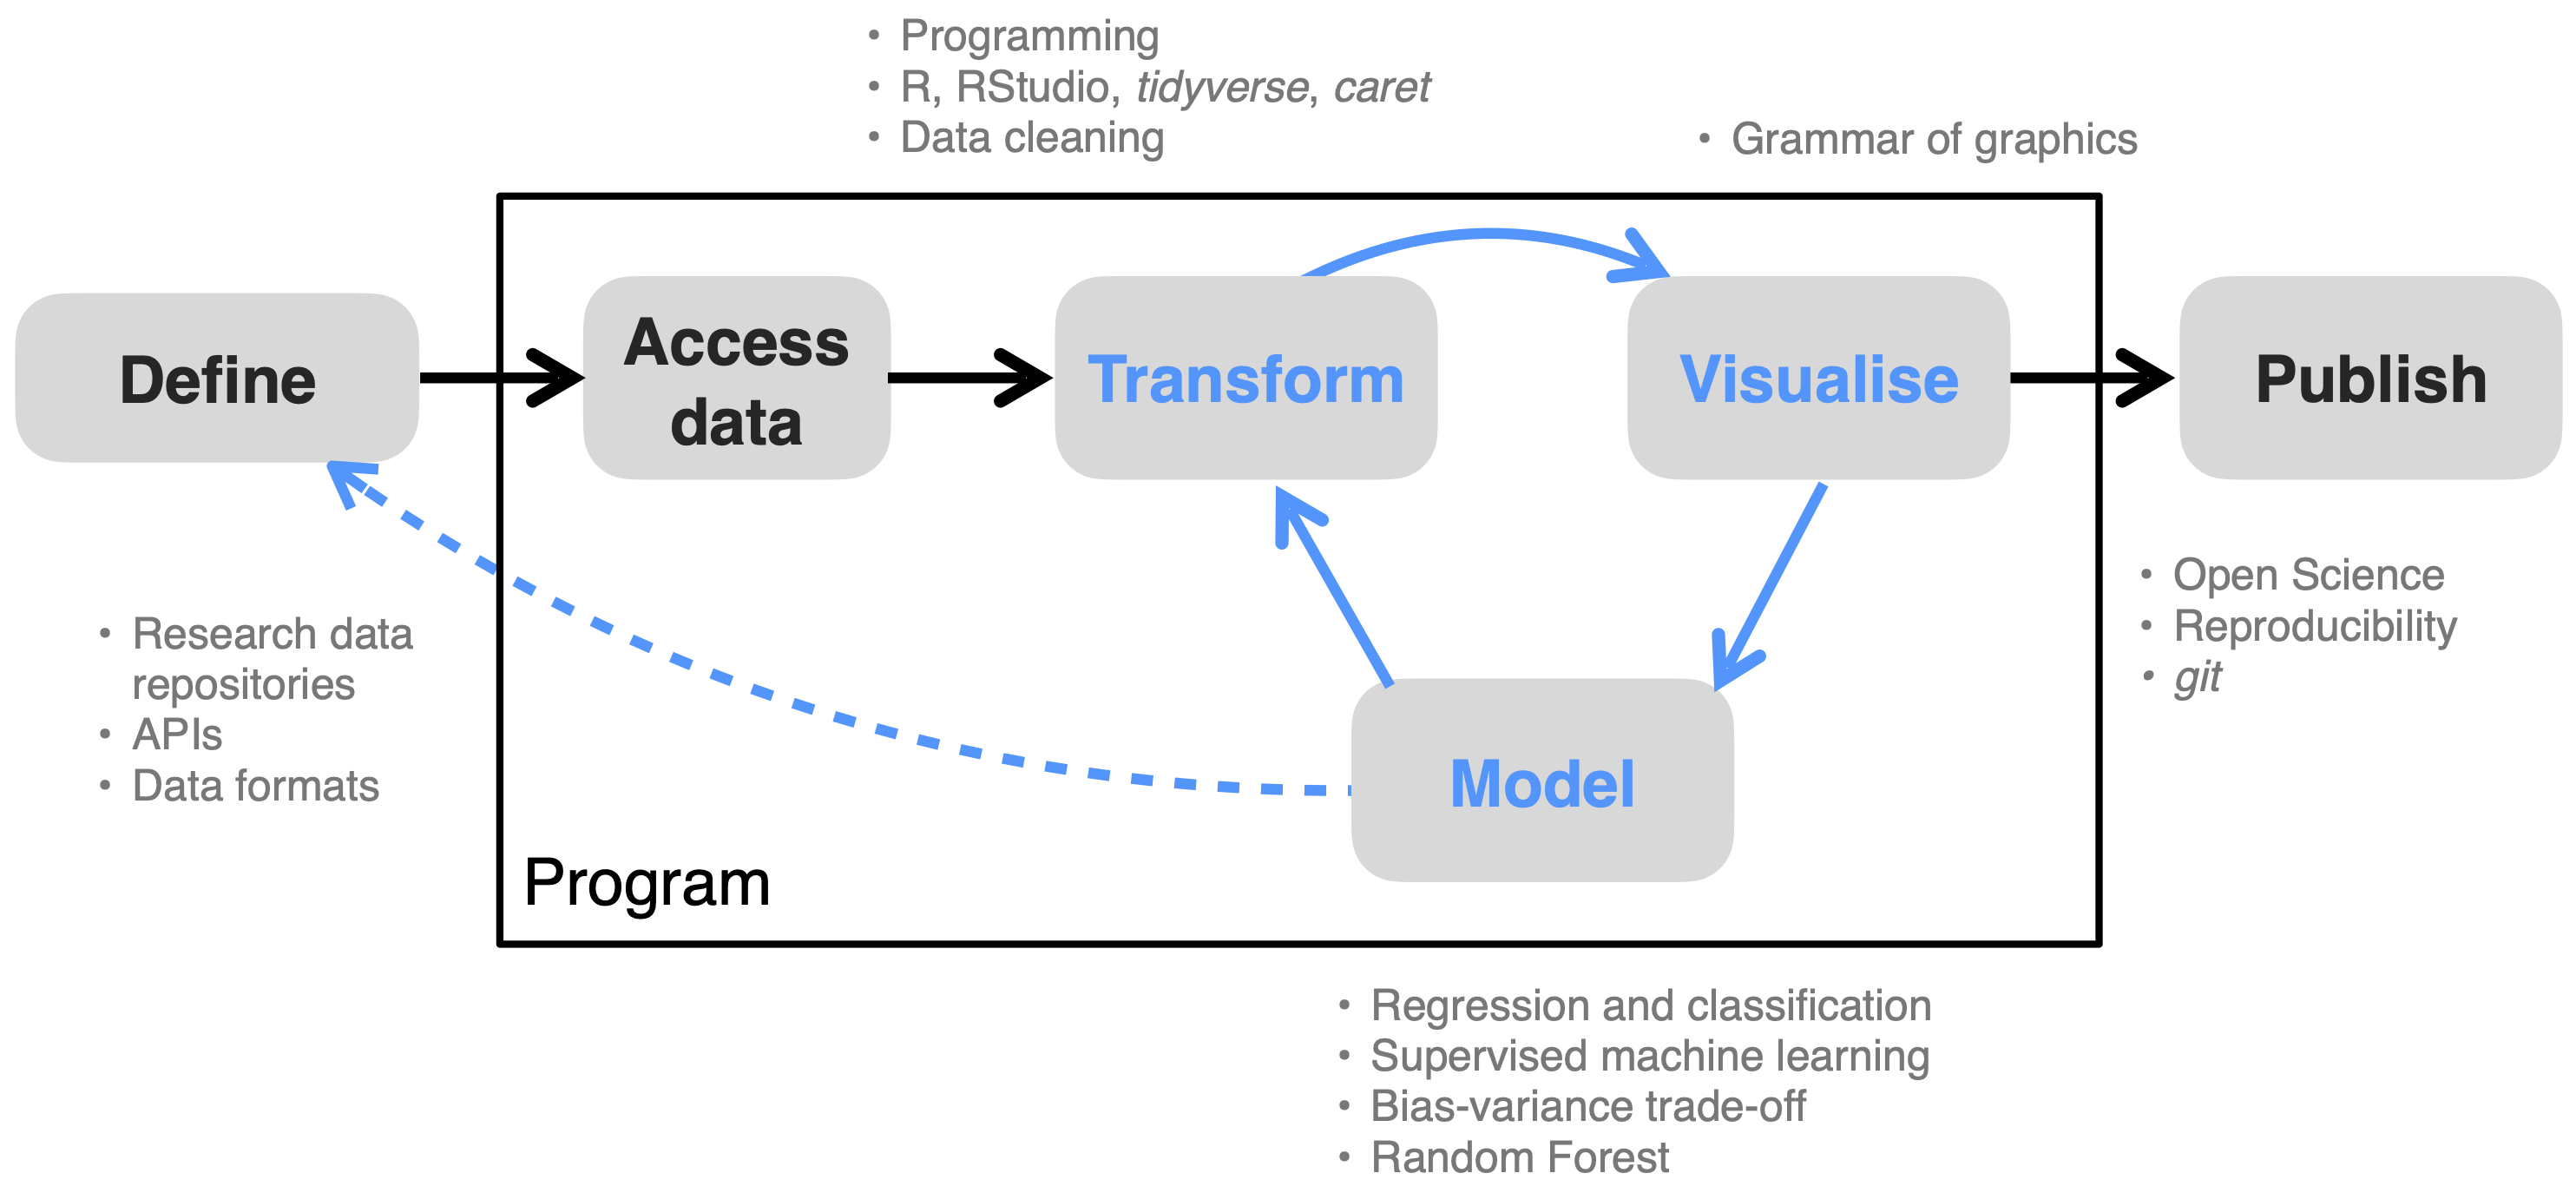 The data science workflow and keywords of contents covered in Applied Geodata Science I. Figure adapted from: [Wickham and Grolemund *R for Data Science*](https://r4ds.had.co.nz/index.html)